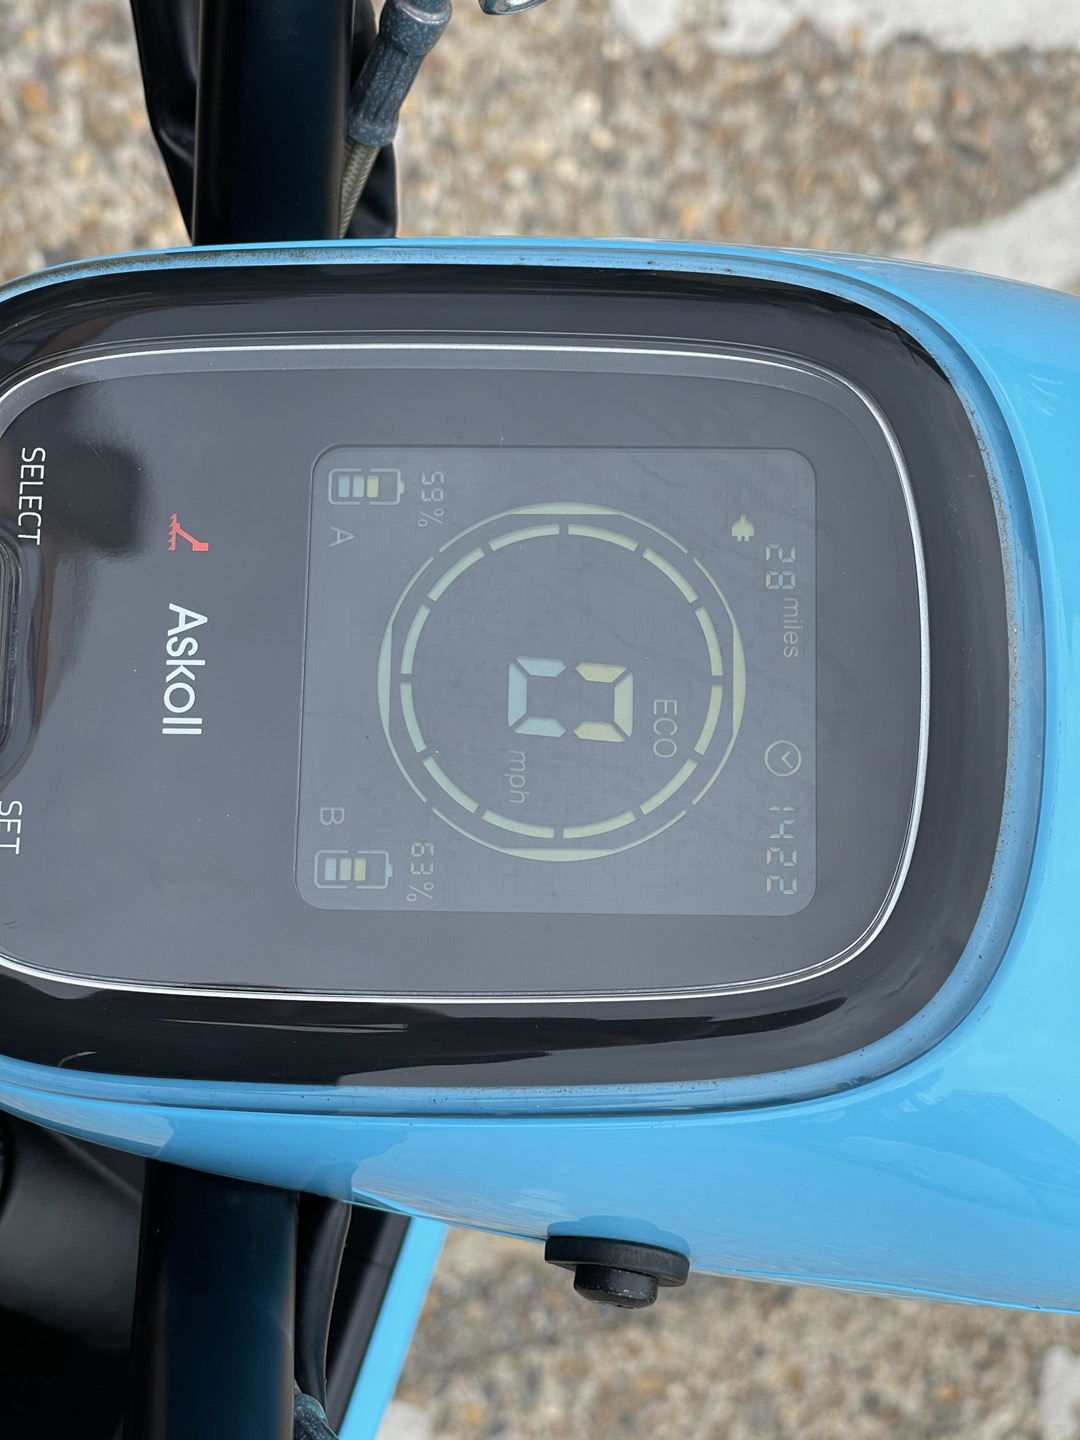 Askoll eSpro 70 dash, eco mode on, 28 miles range with 18 miles covered